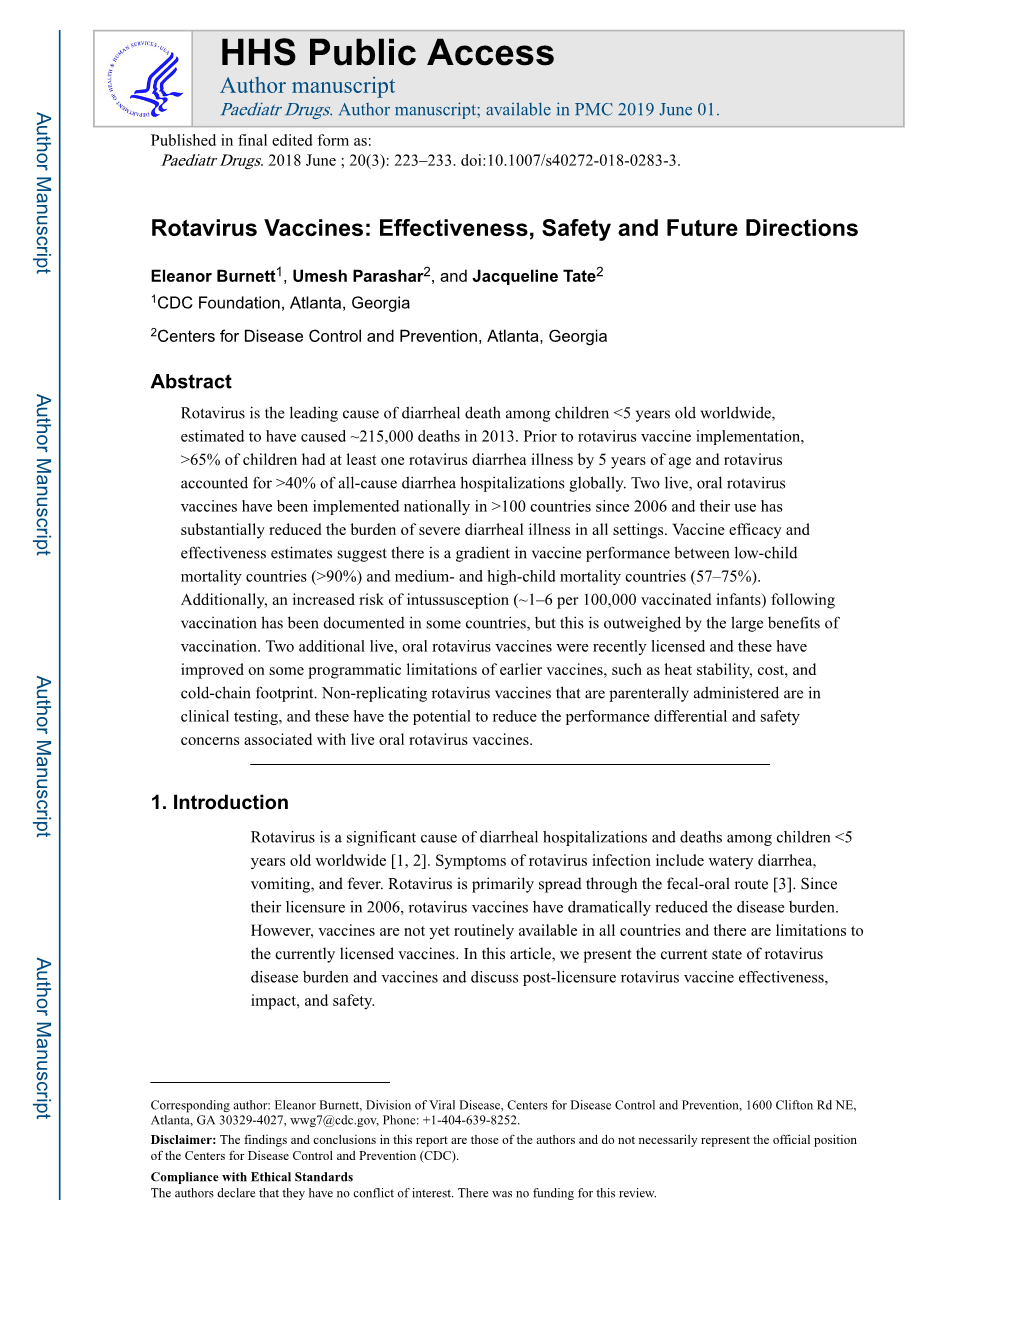 Rotavirus Vaccines: Effectiveness, Safety and Future Directions